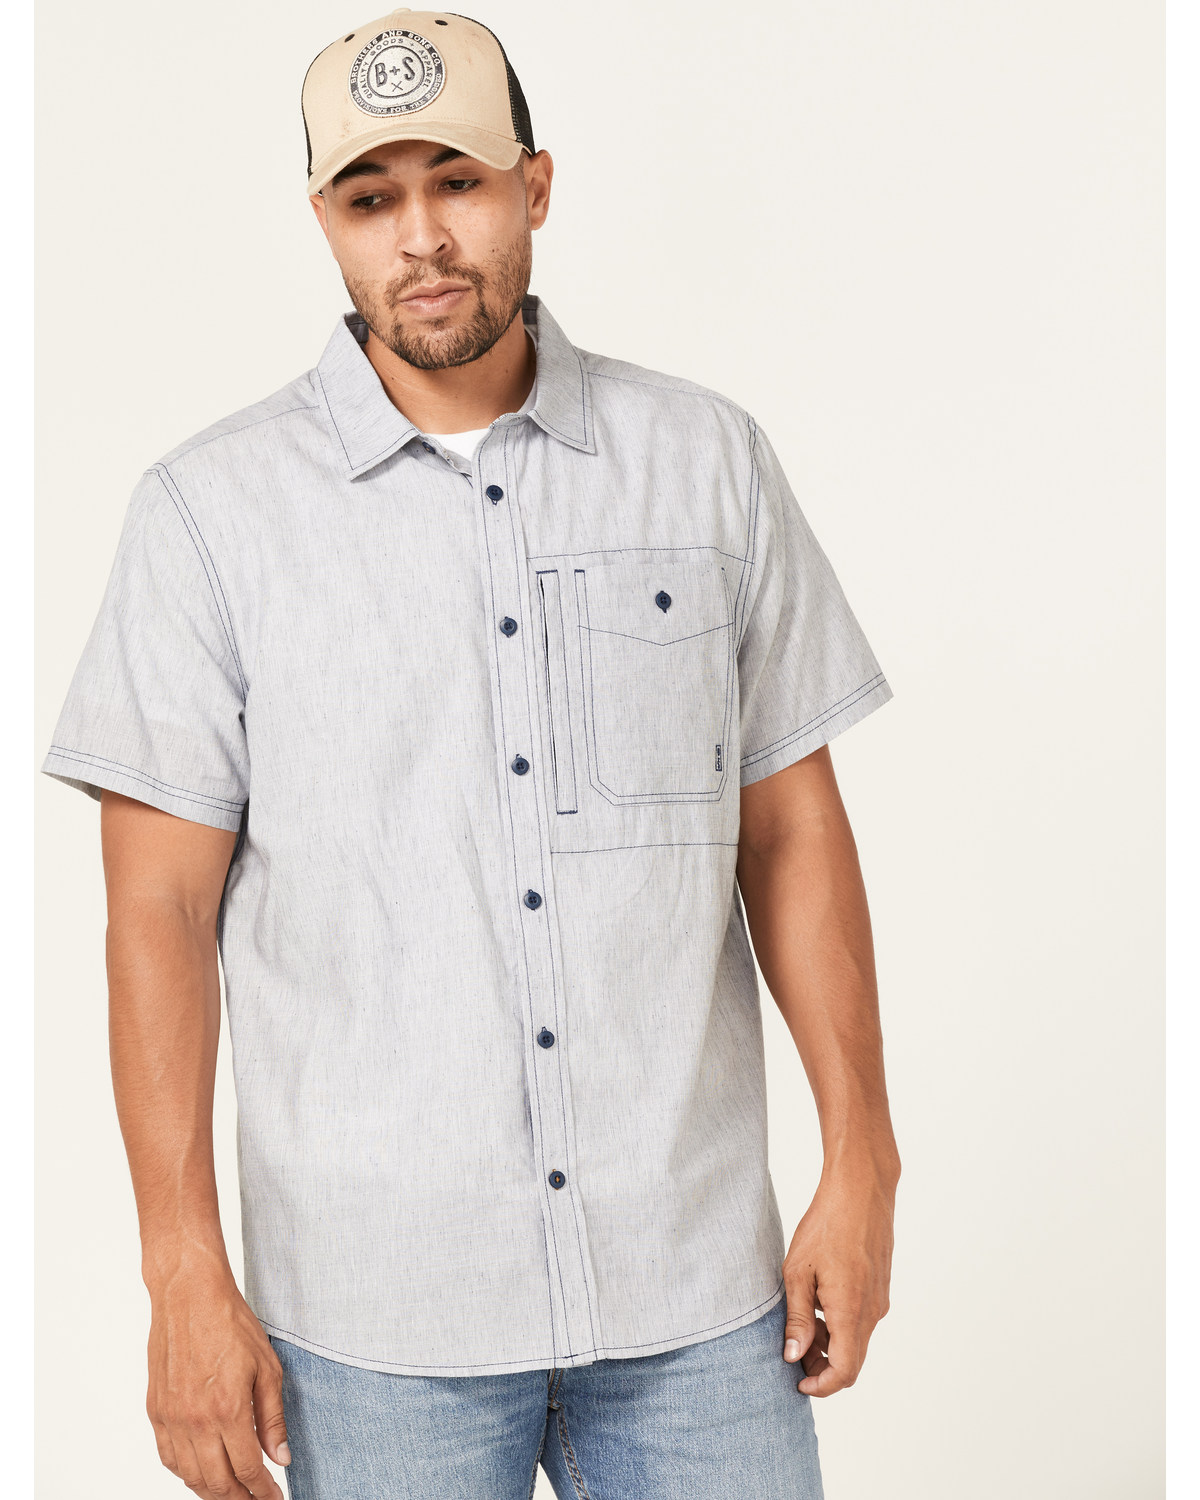 Brothers and Sons Men's Performance Short Sleeve Button Down Western Shirt